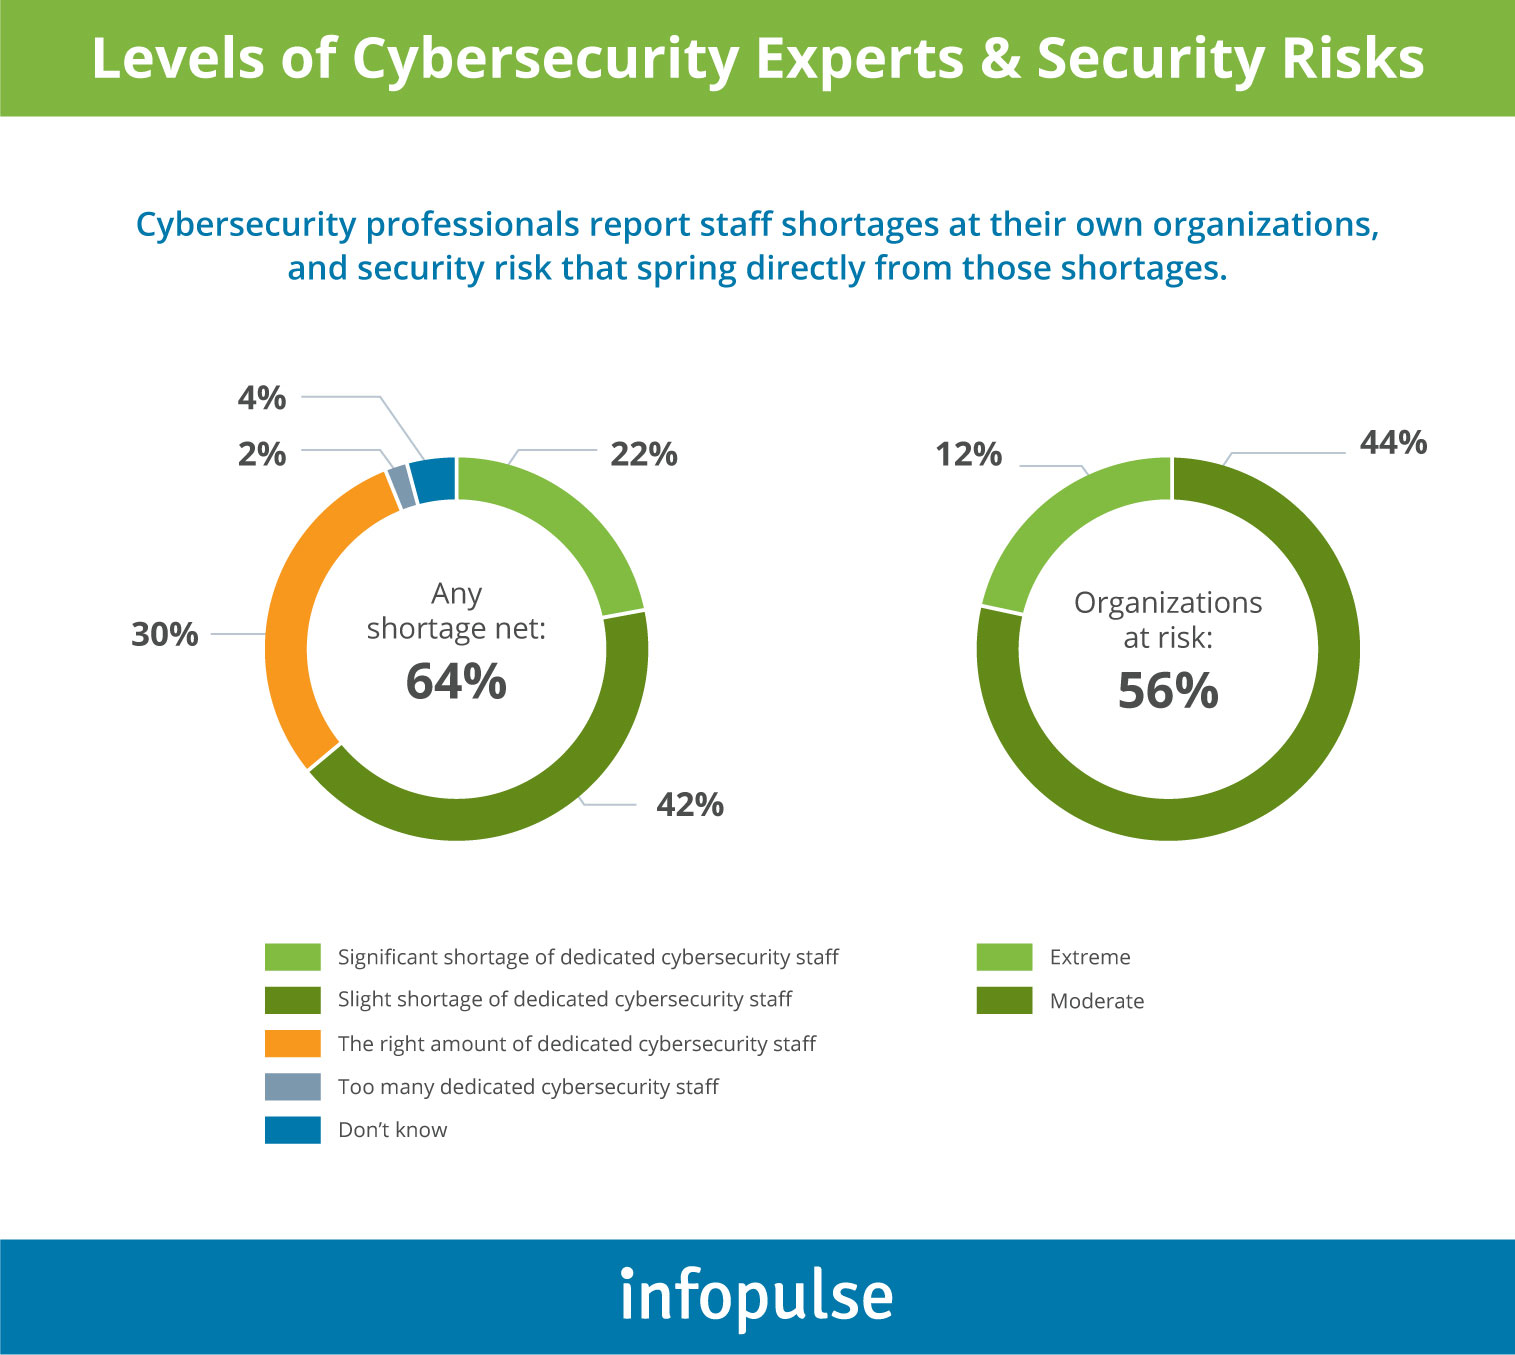 Levels of Cybersecurity Experts & Security Risks - Infopulse - 1